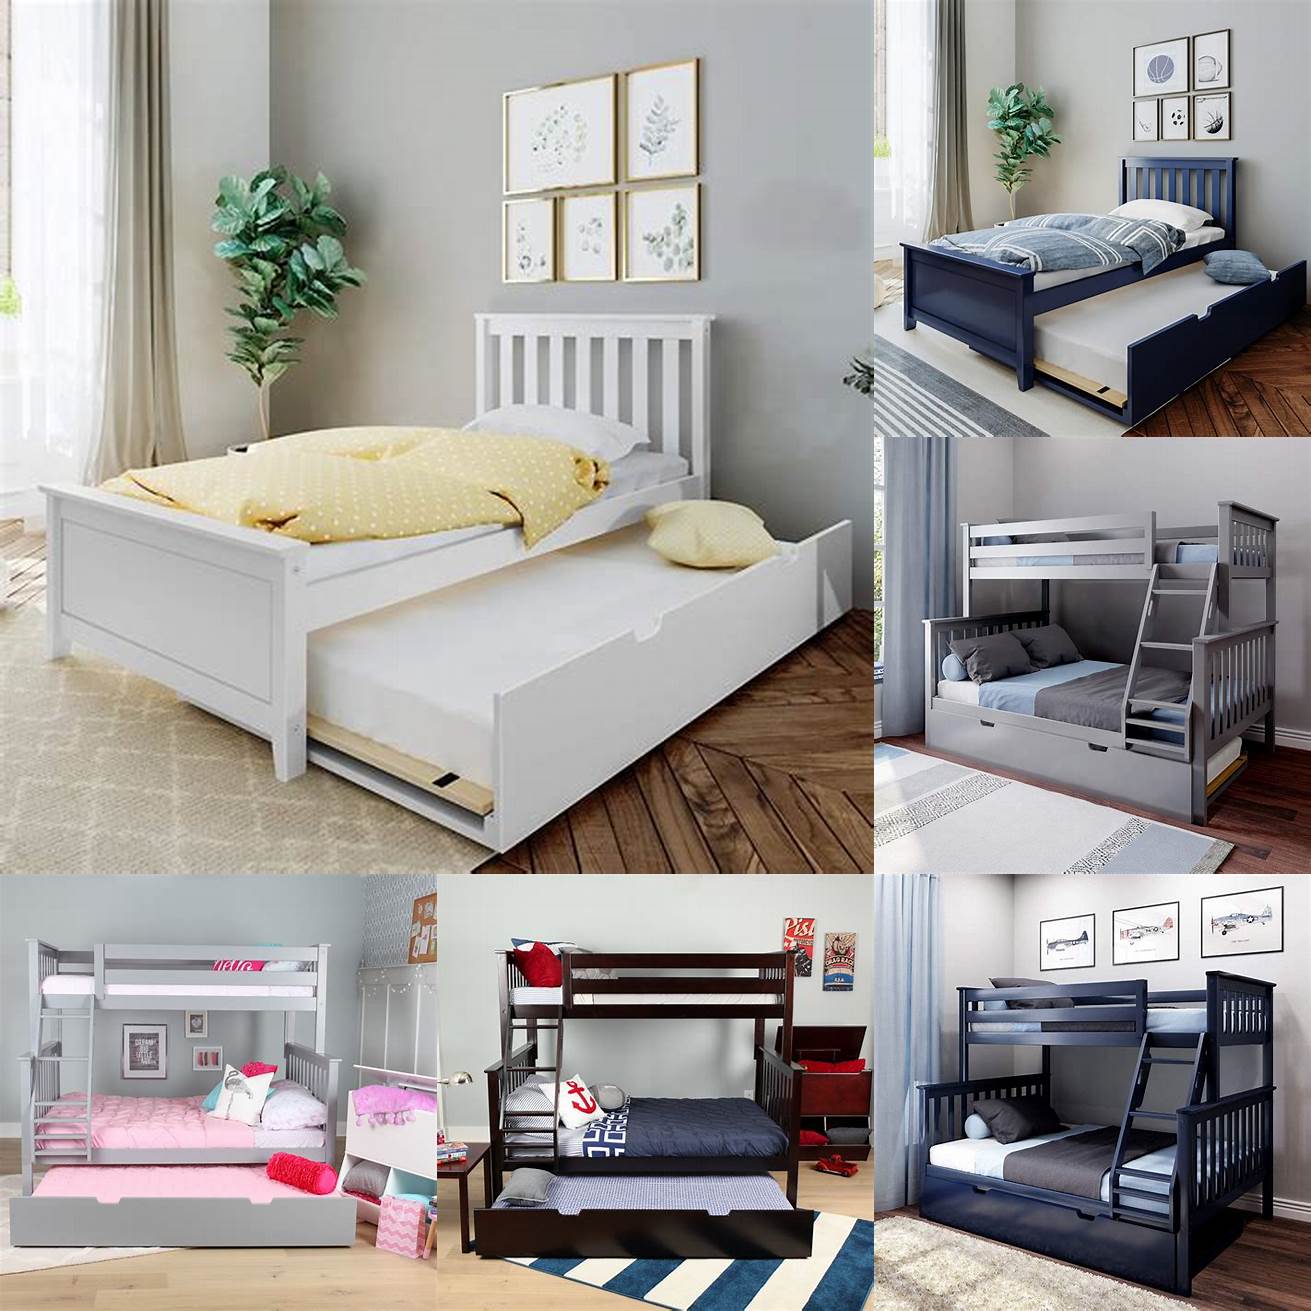 The Max Lily Solid Wood Twin-Size Bed with Trundle Bed is perfect for boys who love to have friends over for sleepovers